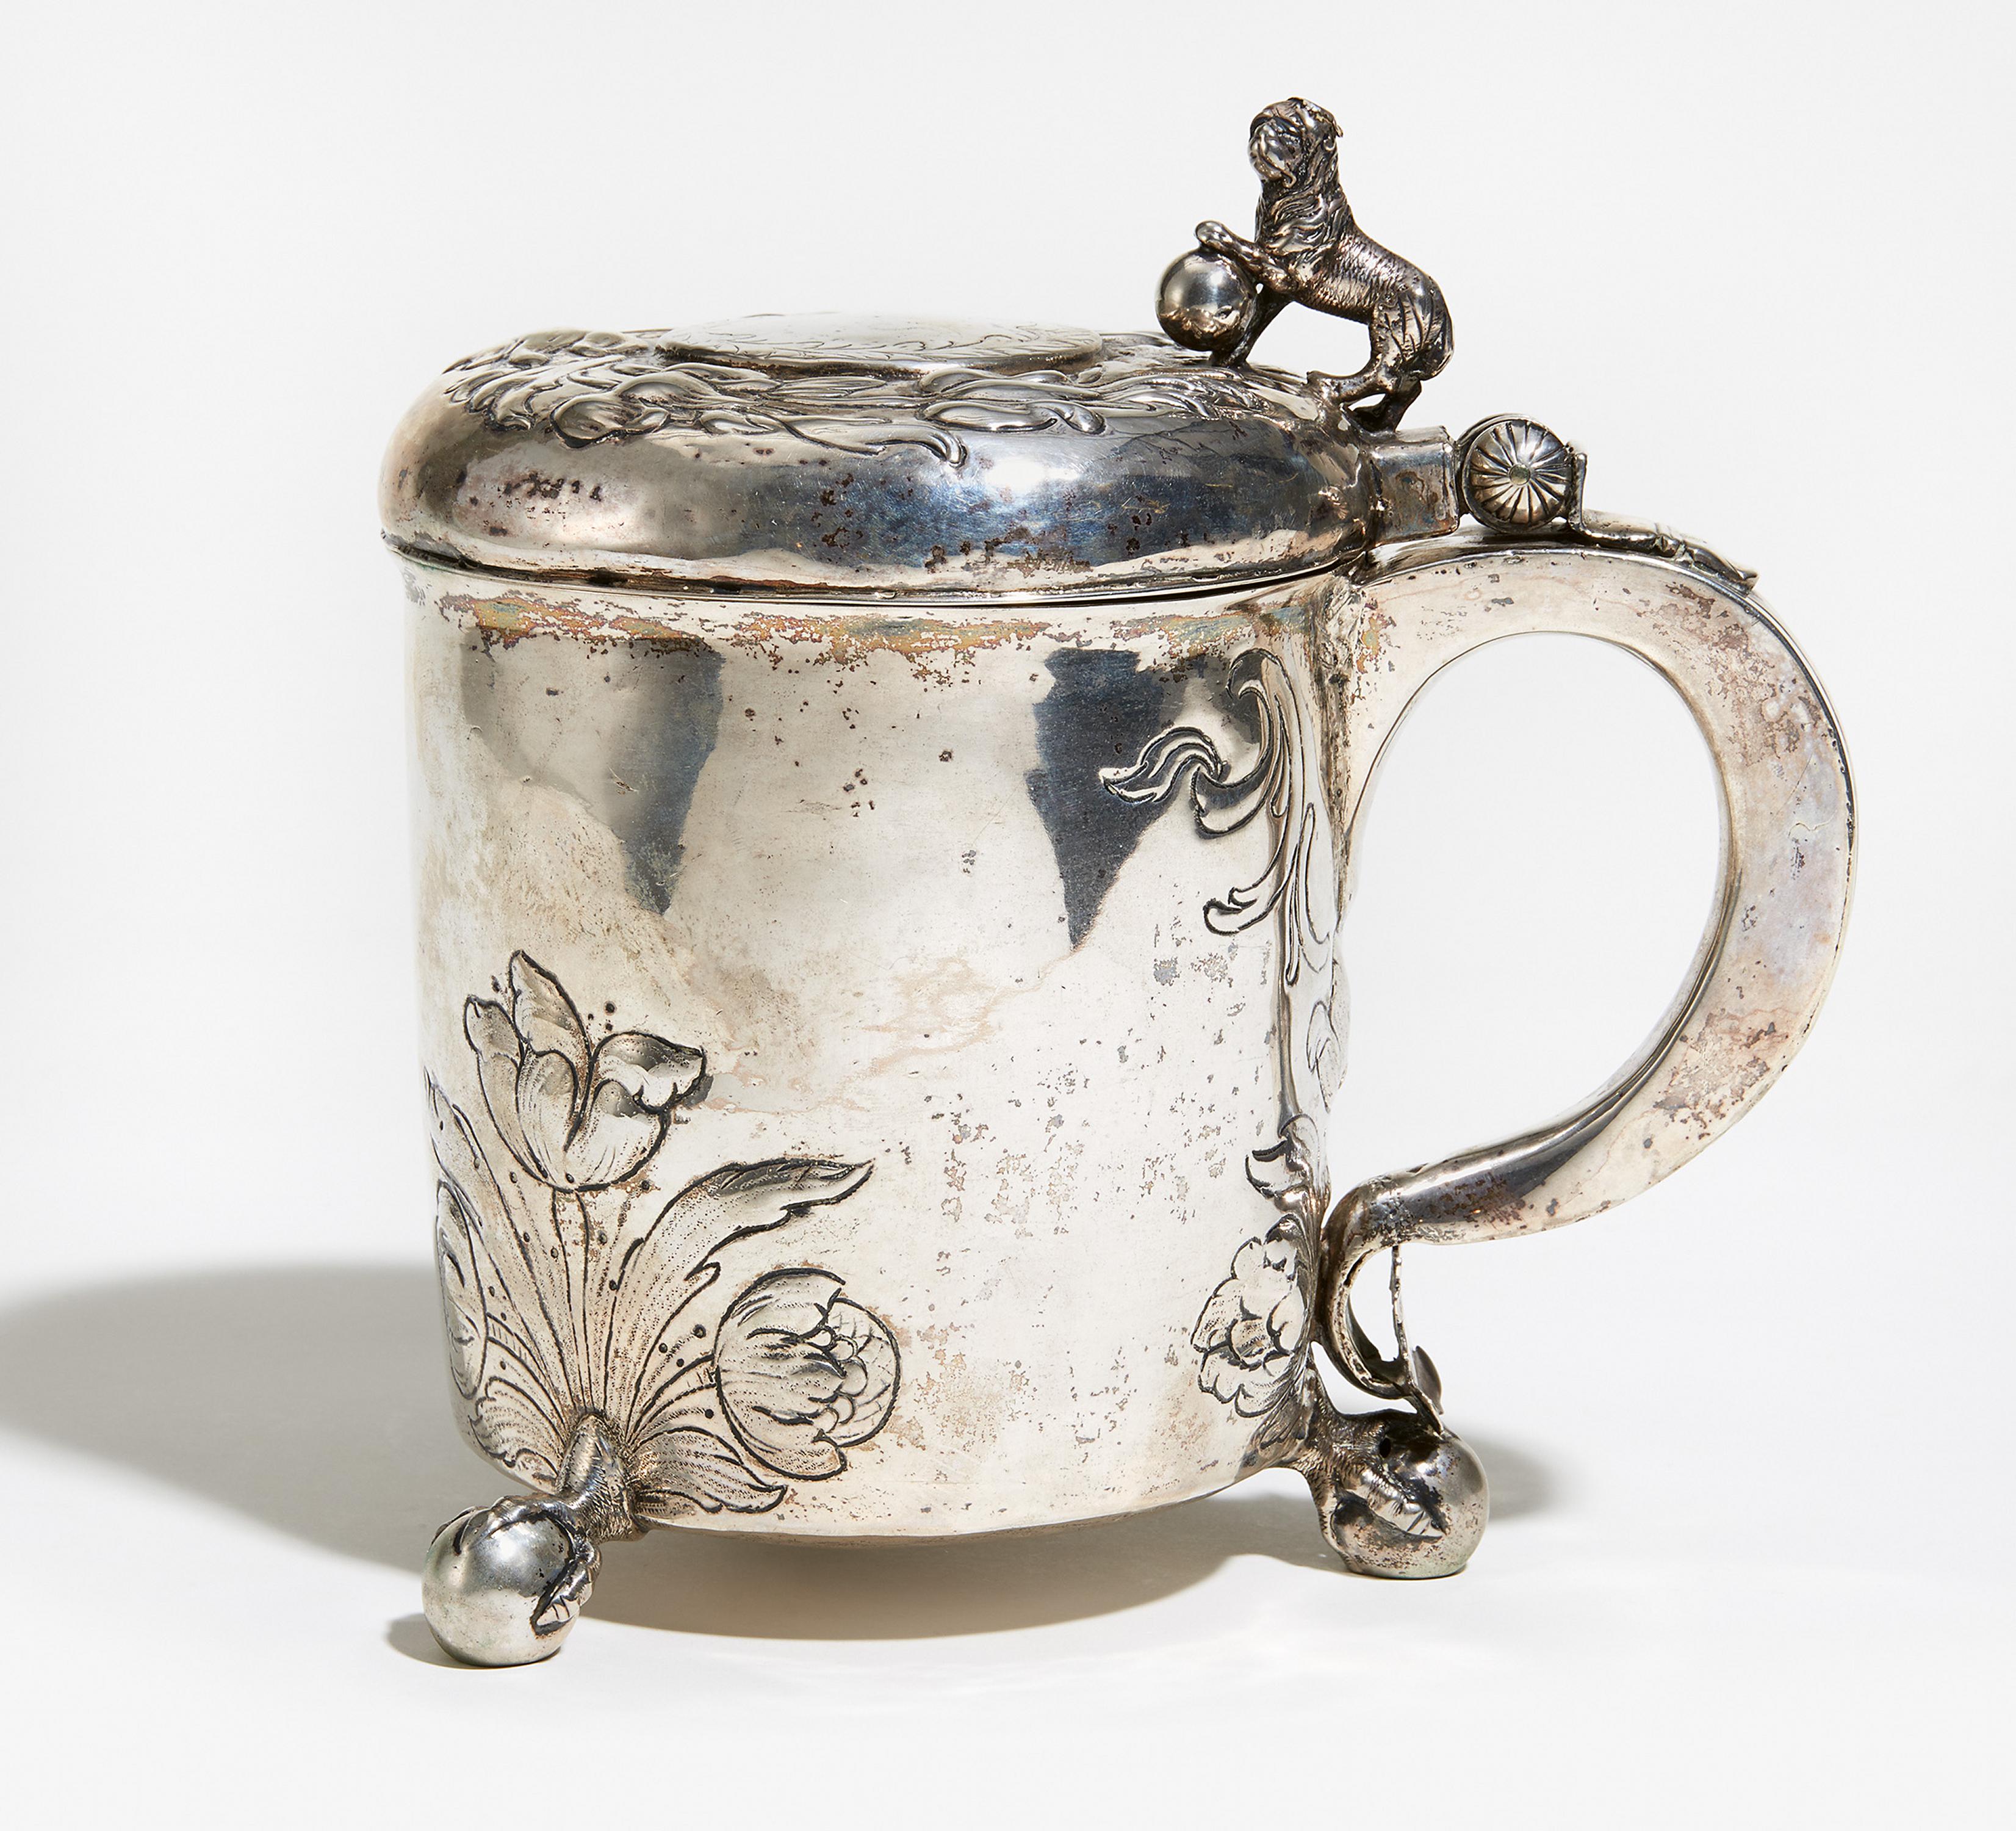 LARGE SILVER TANKARD WITH GILT INTERIOR AND BALL FEET. Presumably North Europe. Date: 18th